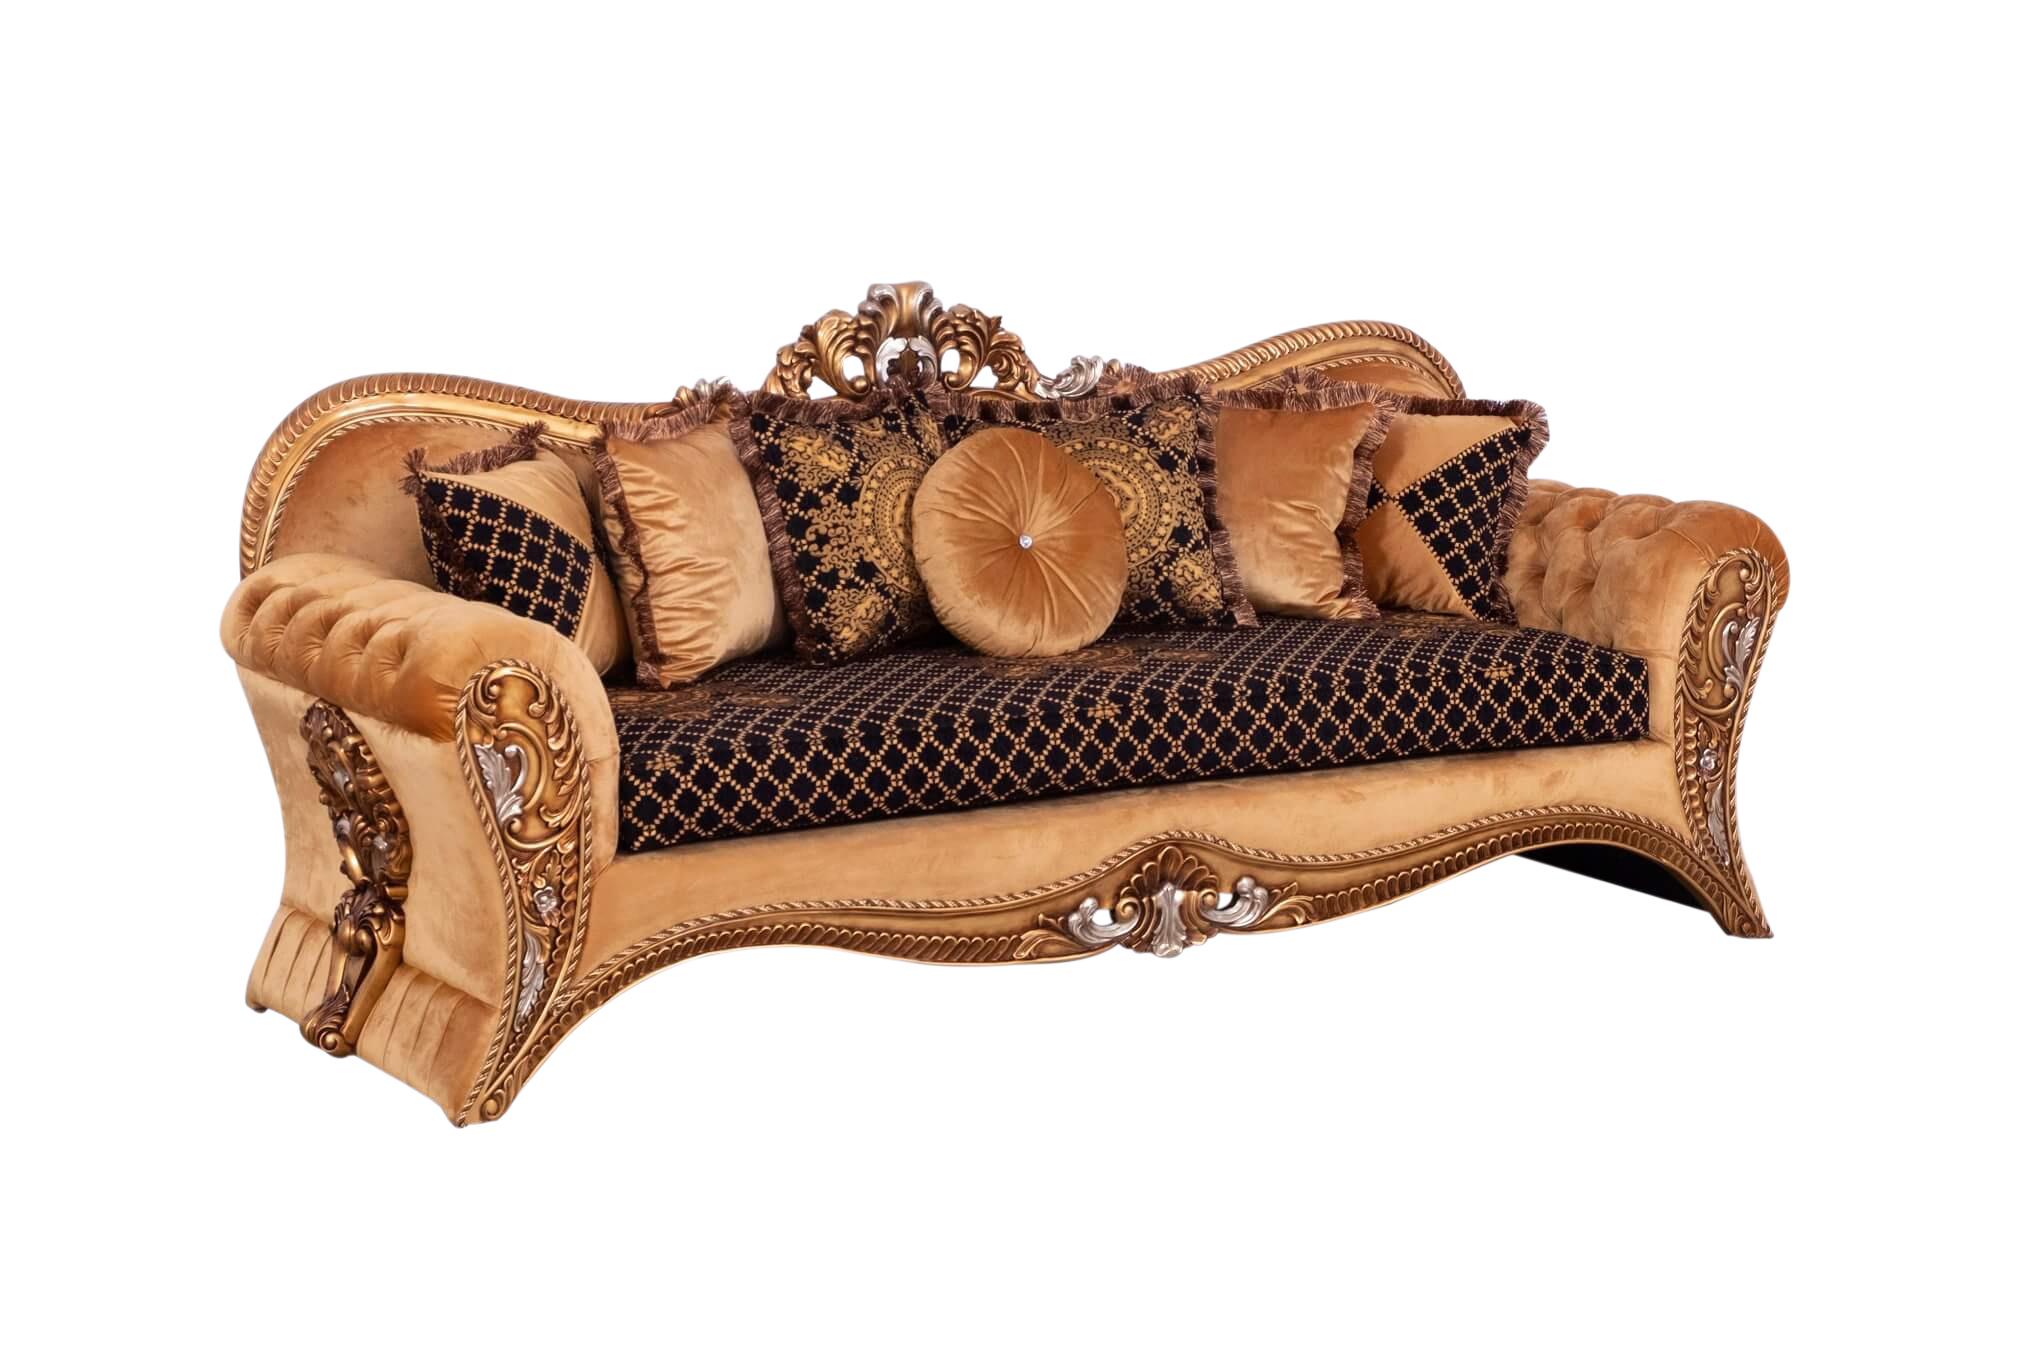 Classic, Traditional Sofa EMPERADOR 42035-S in Gold, Brown Fabric